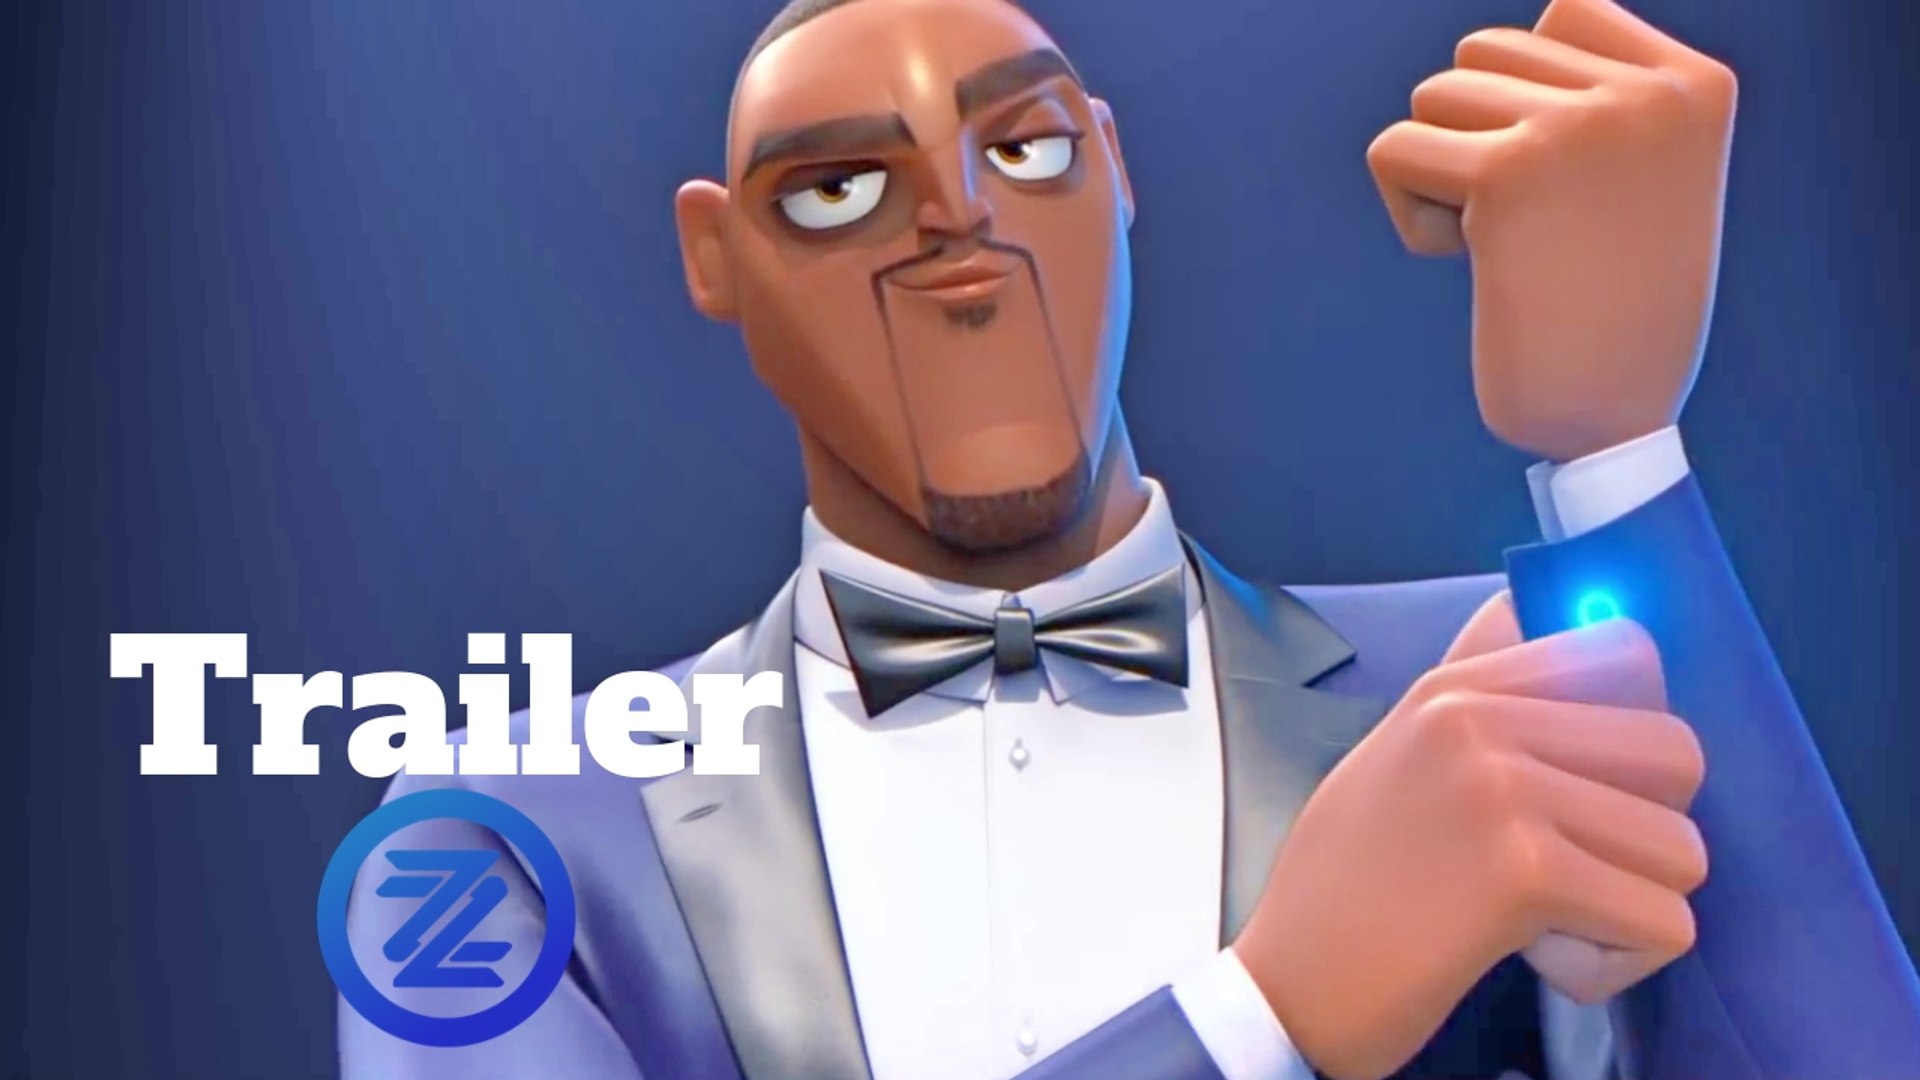 Spies in Disguise Trailer #1 (2019) Will Smith, Tom Holland Animated Movie  HD - video Dailymotion